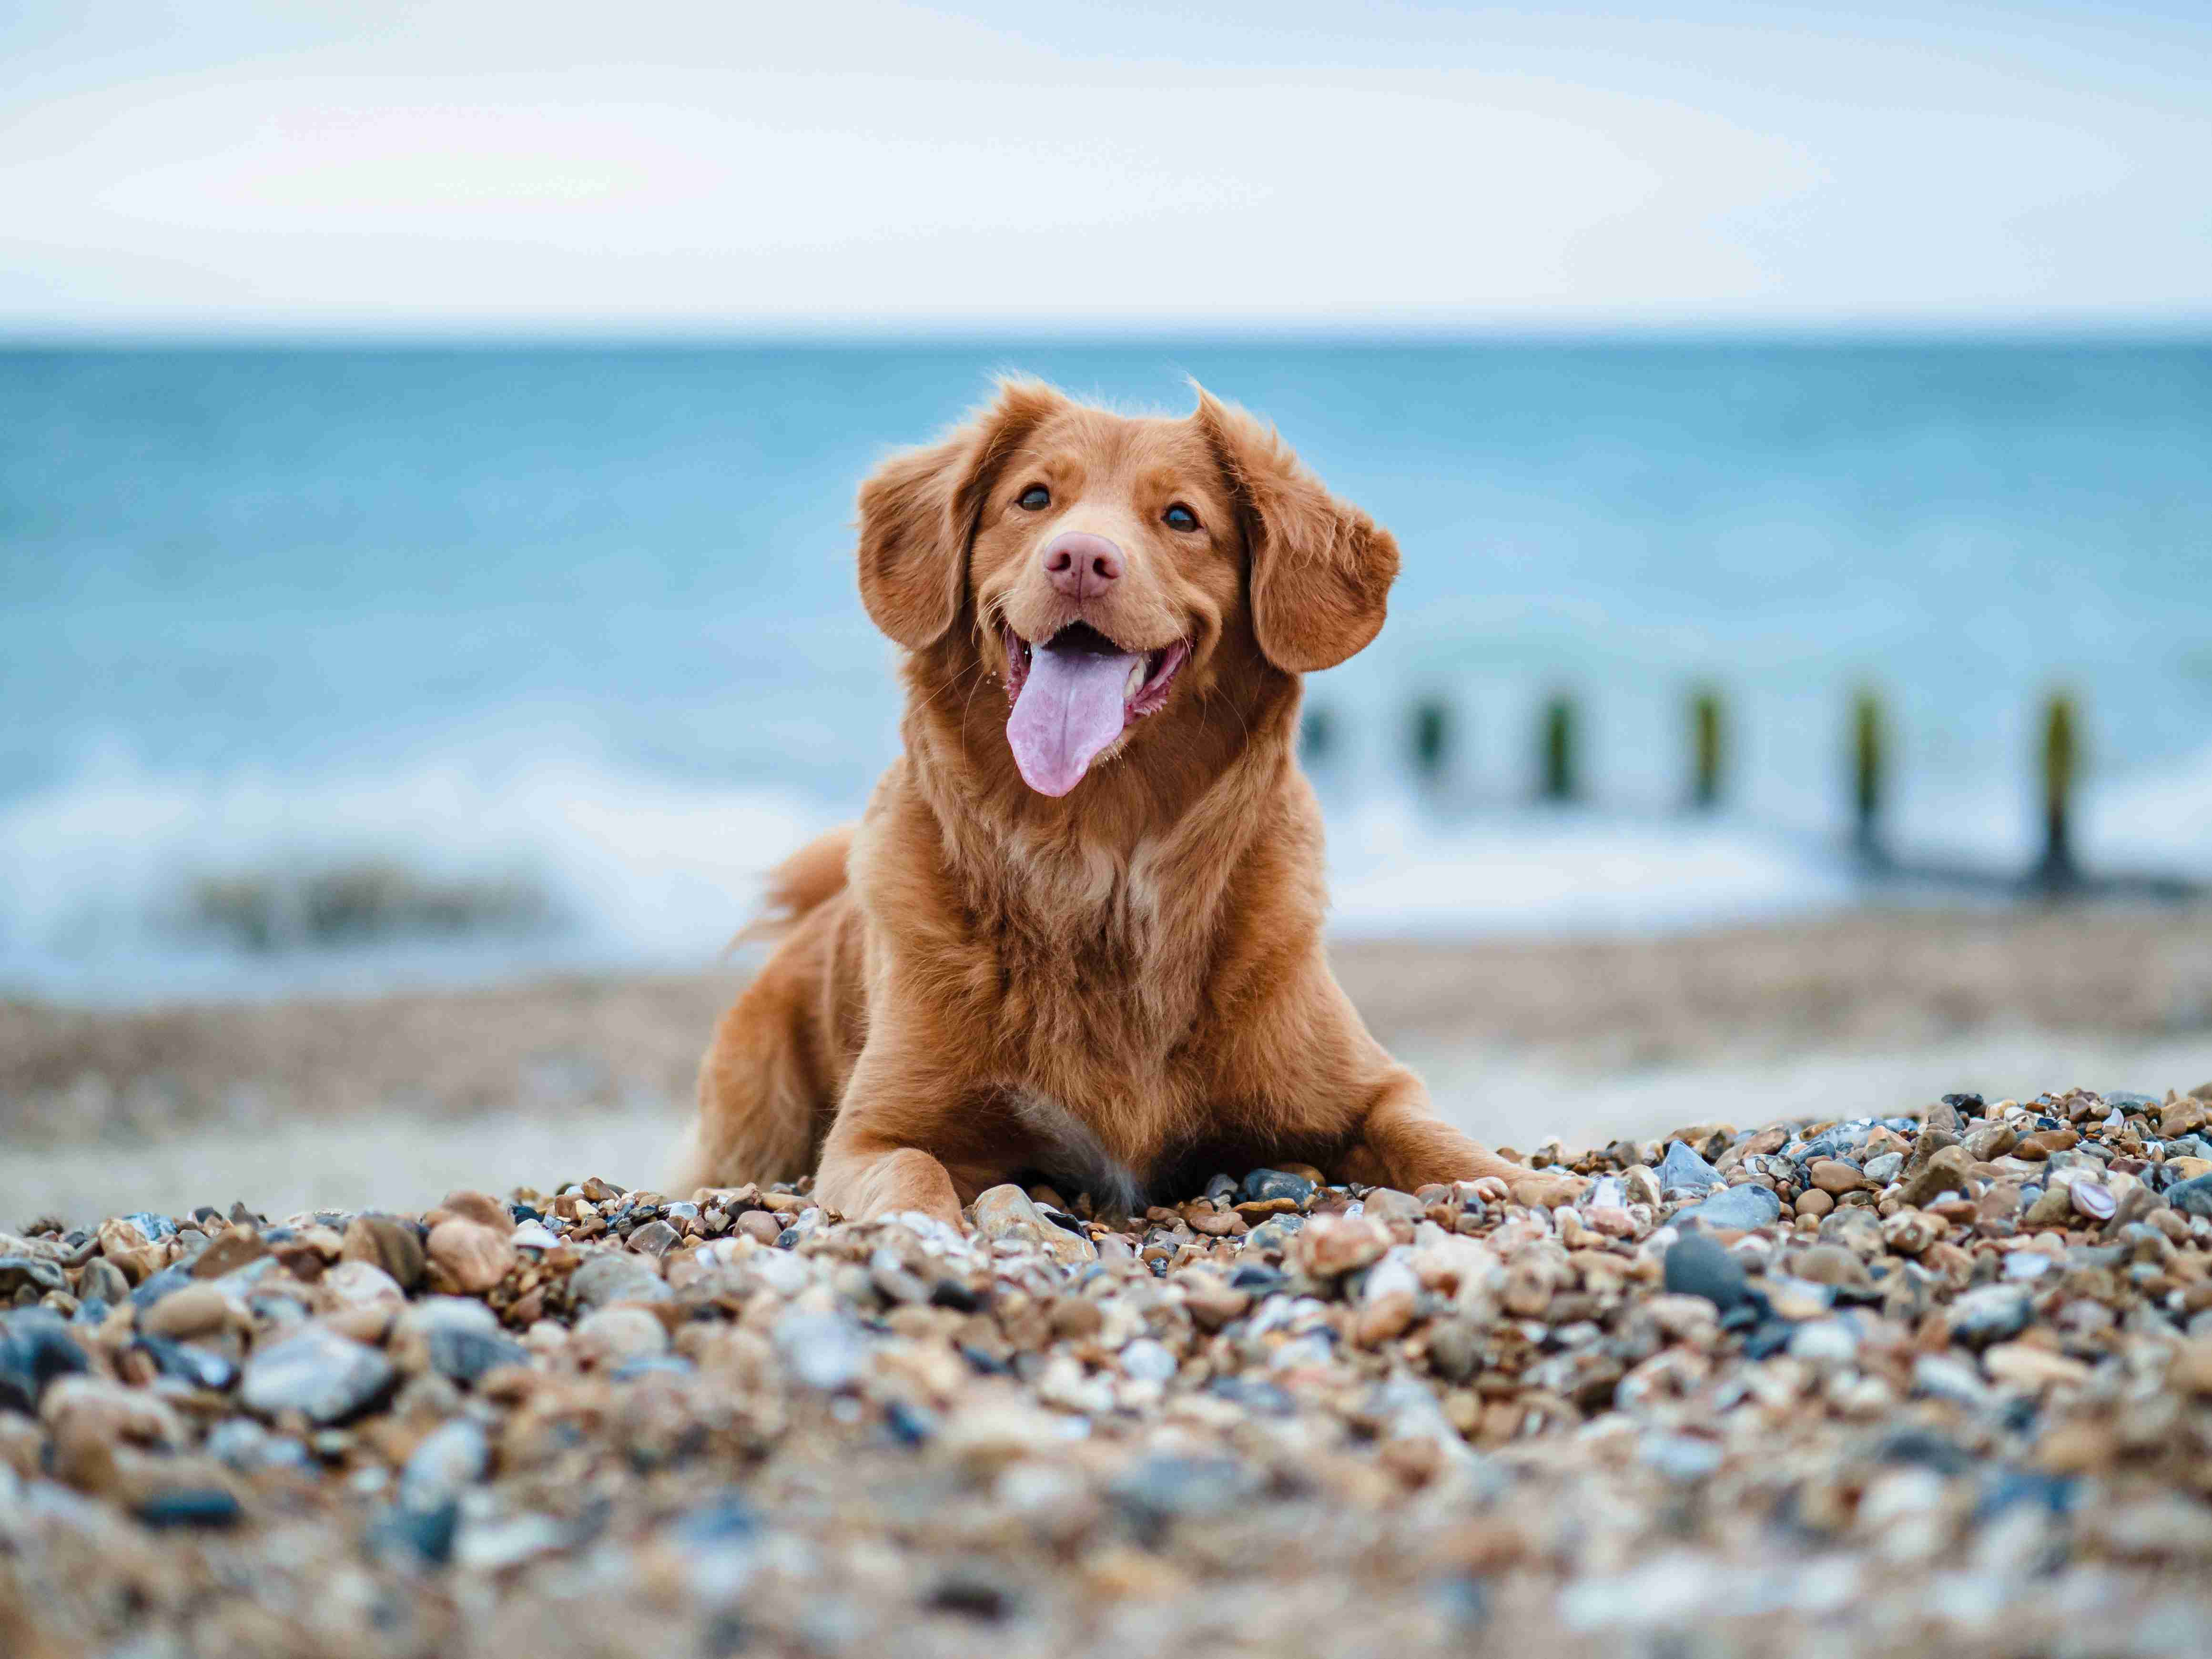 How can I help prevent my Golden Retriever from developing cancer?